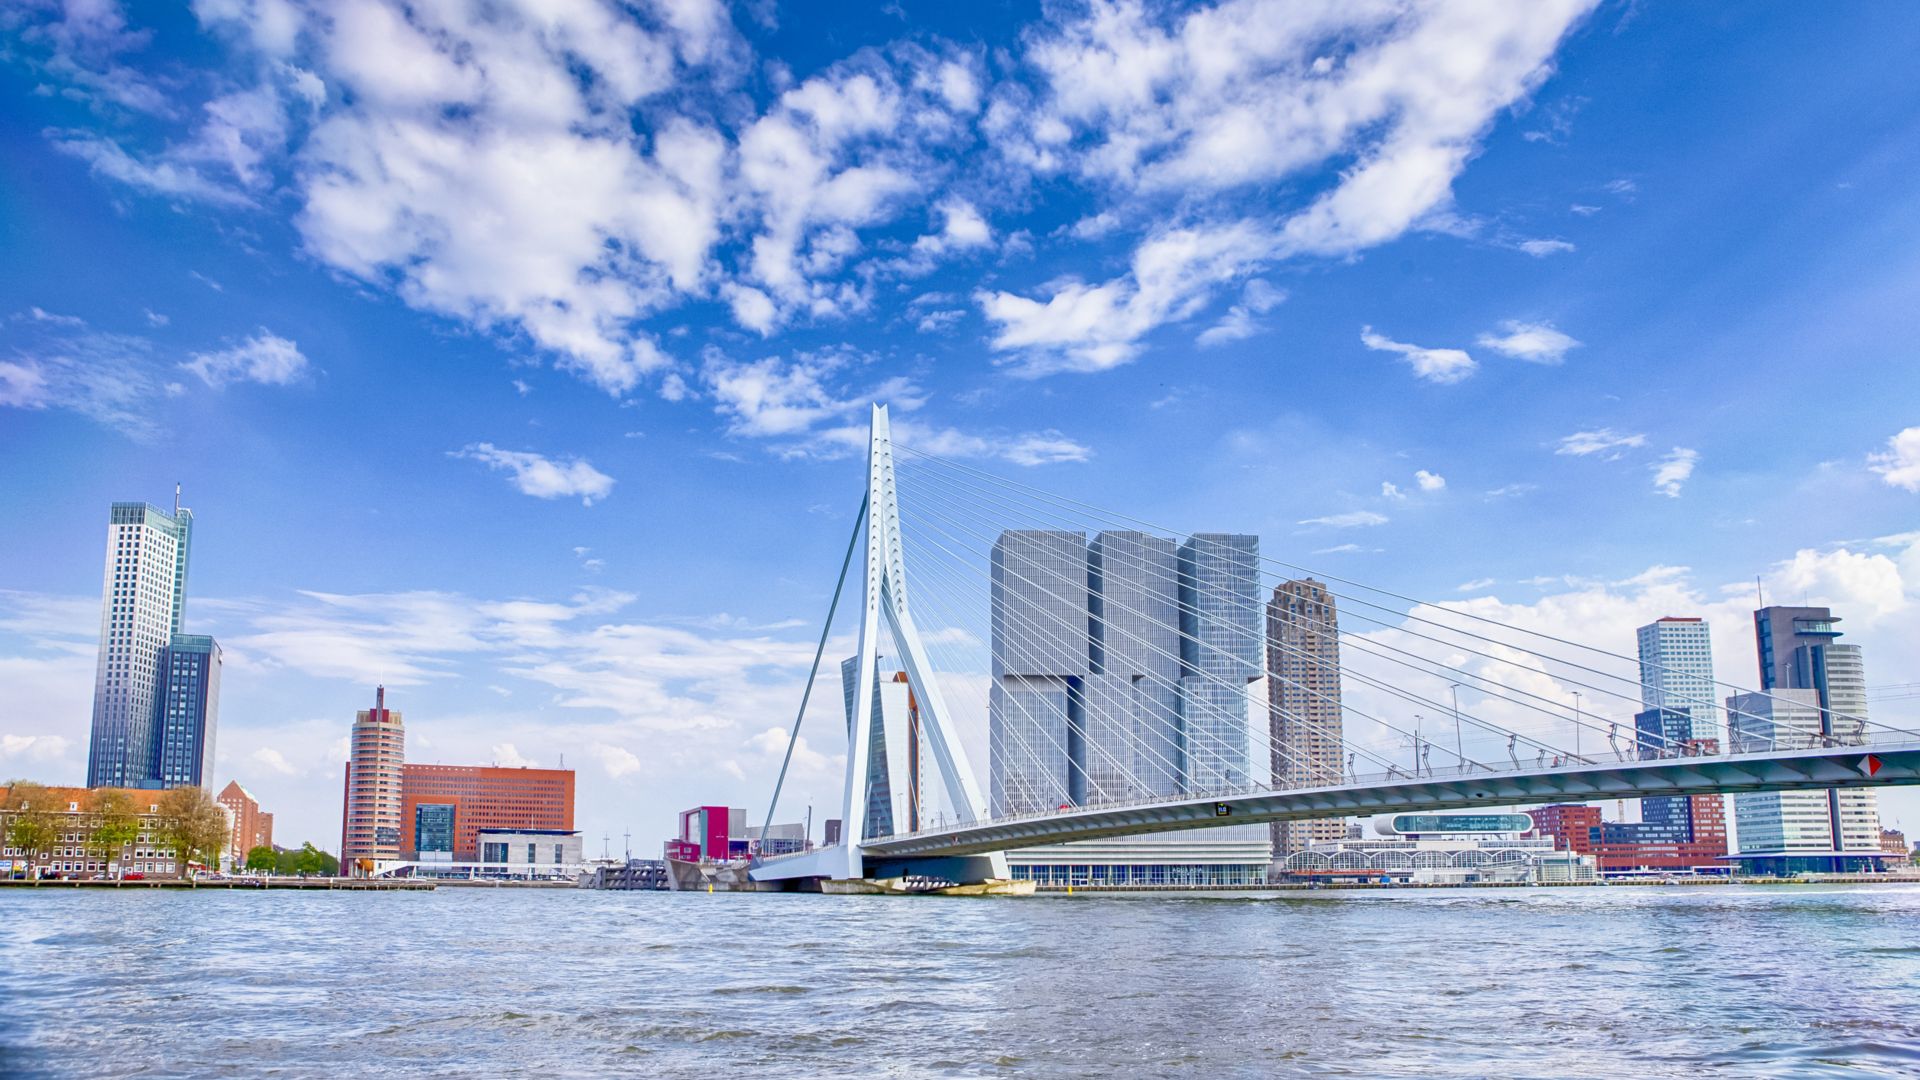 Attractive View of Renowned Erasmusbrug (Swan Bridge) in  Rotterdam in front of Port and Harbour. Picture Made At Day. Horizontal Image